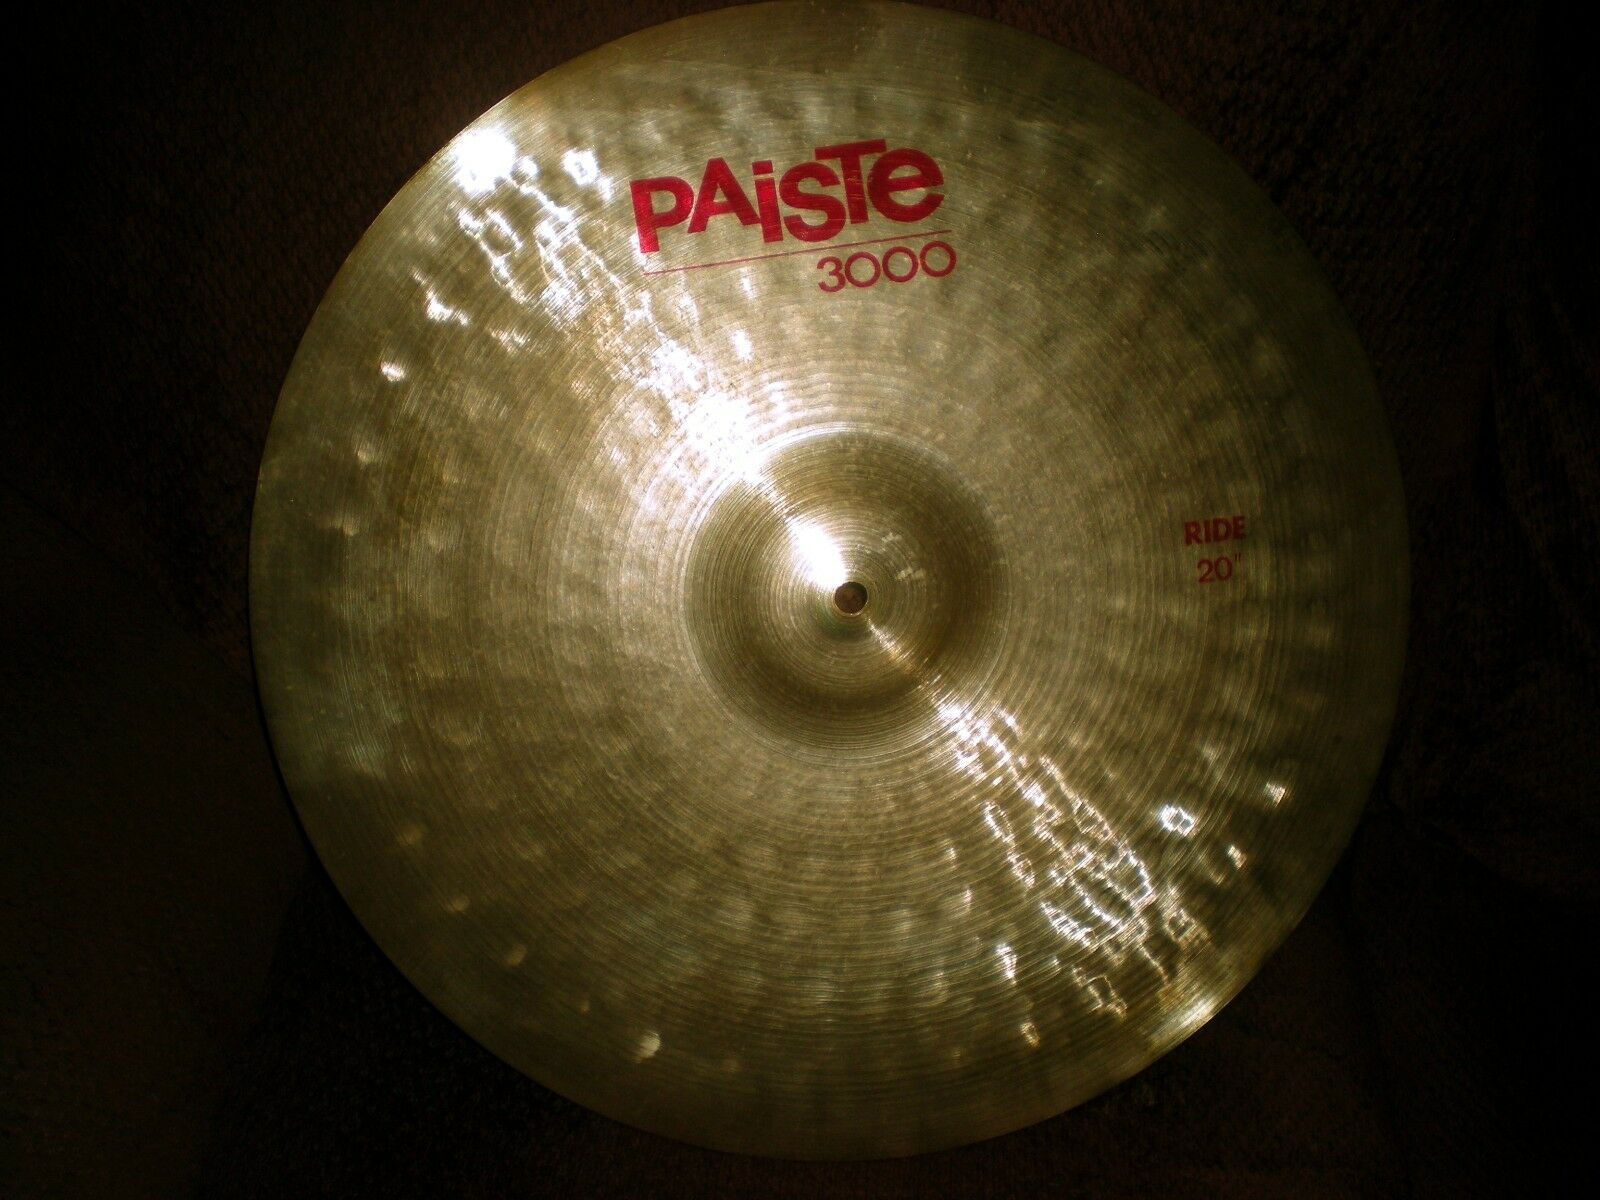 Paiste 3000 Vintage Ride Cymbal, 20" Rare, Great Bell, Made In Switzerland 1987